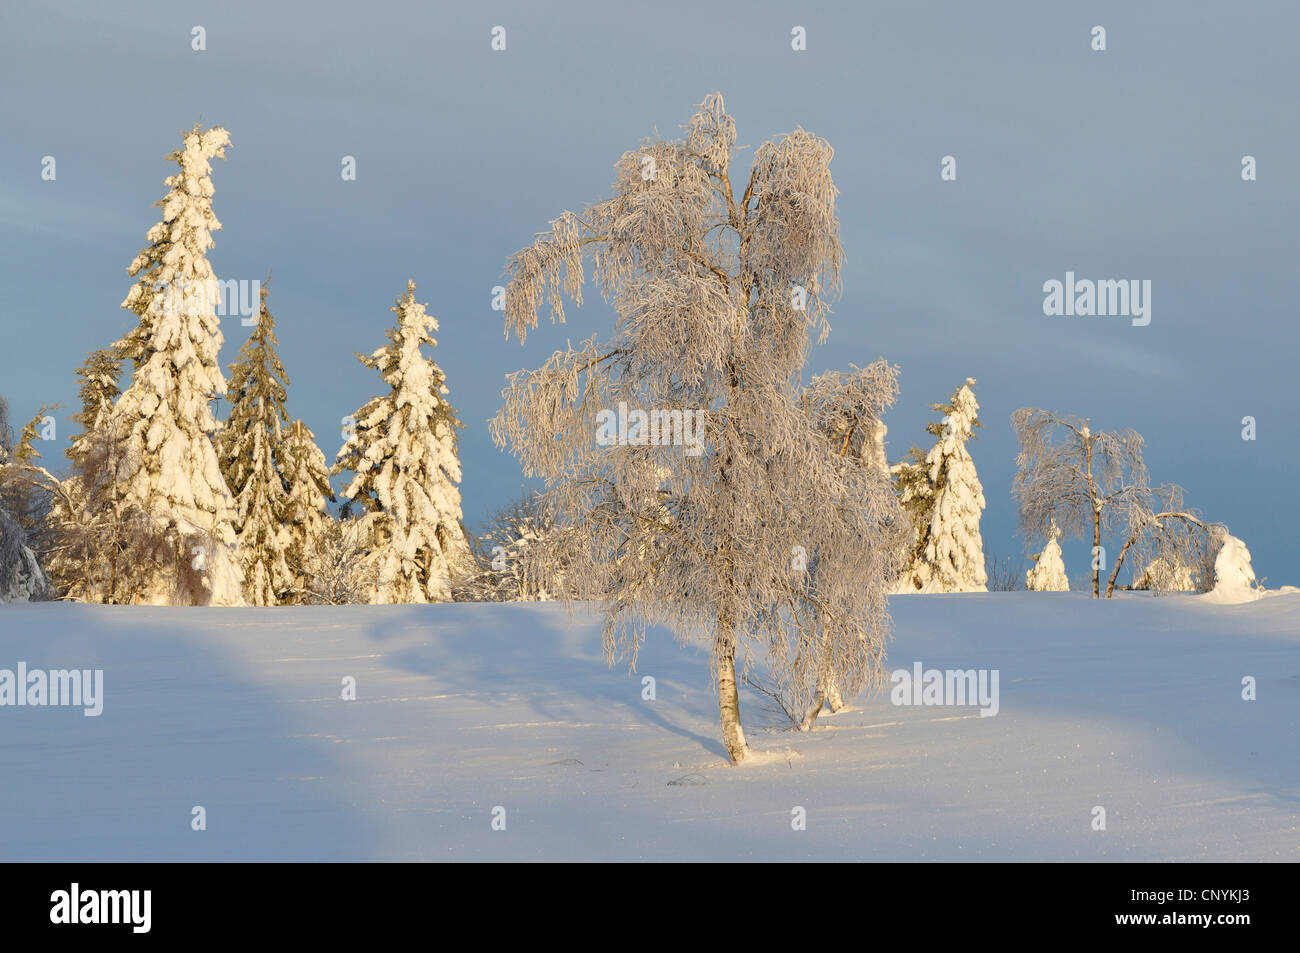 snow covered spruces and birch with hoar frost, Germany Stock Photo